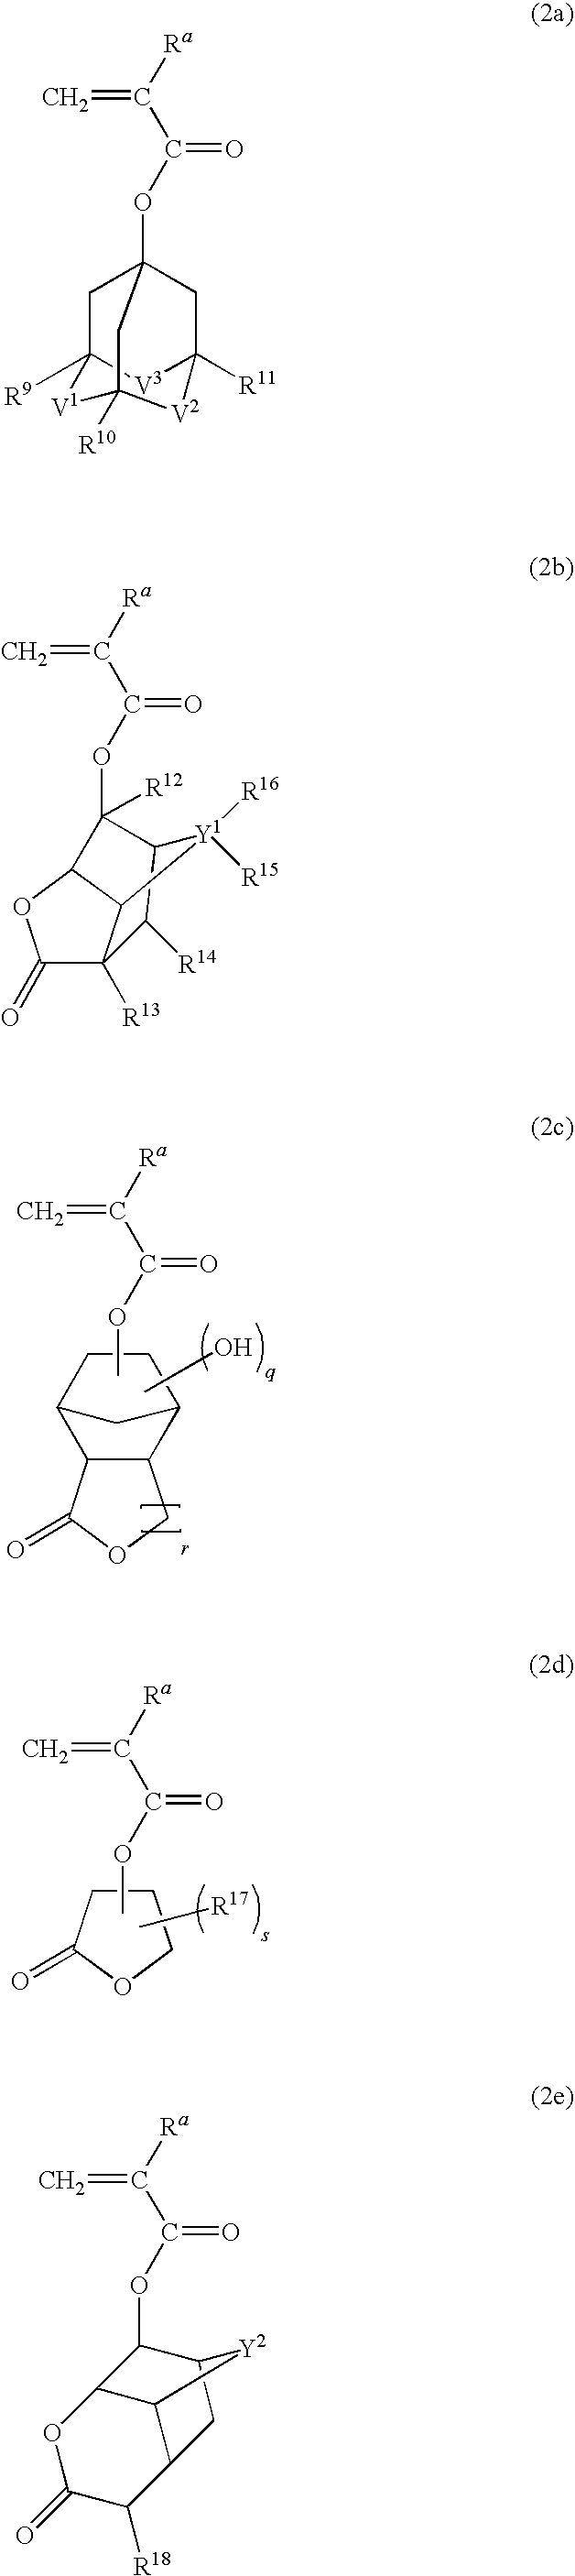 Process for producing photoresist polymeric compounds